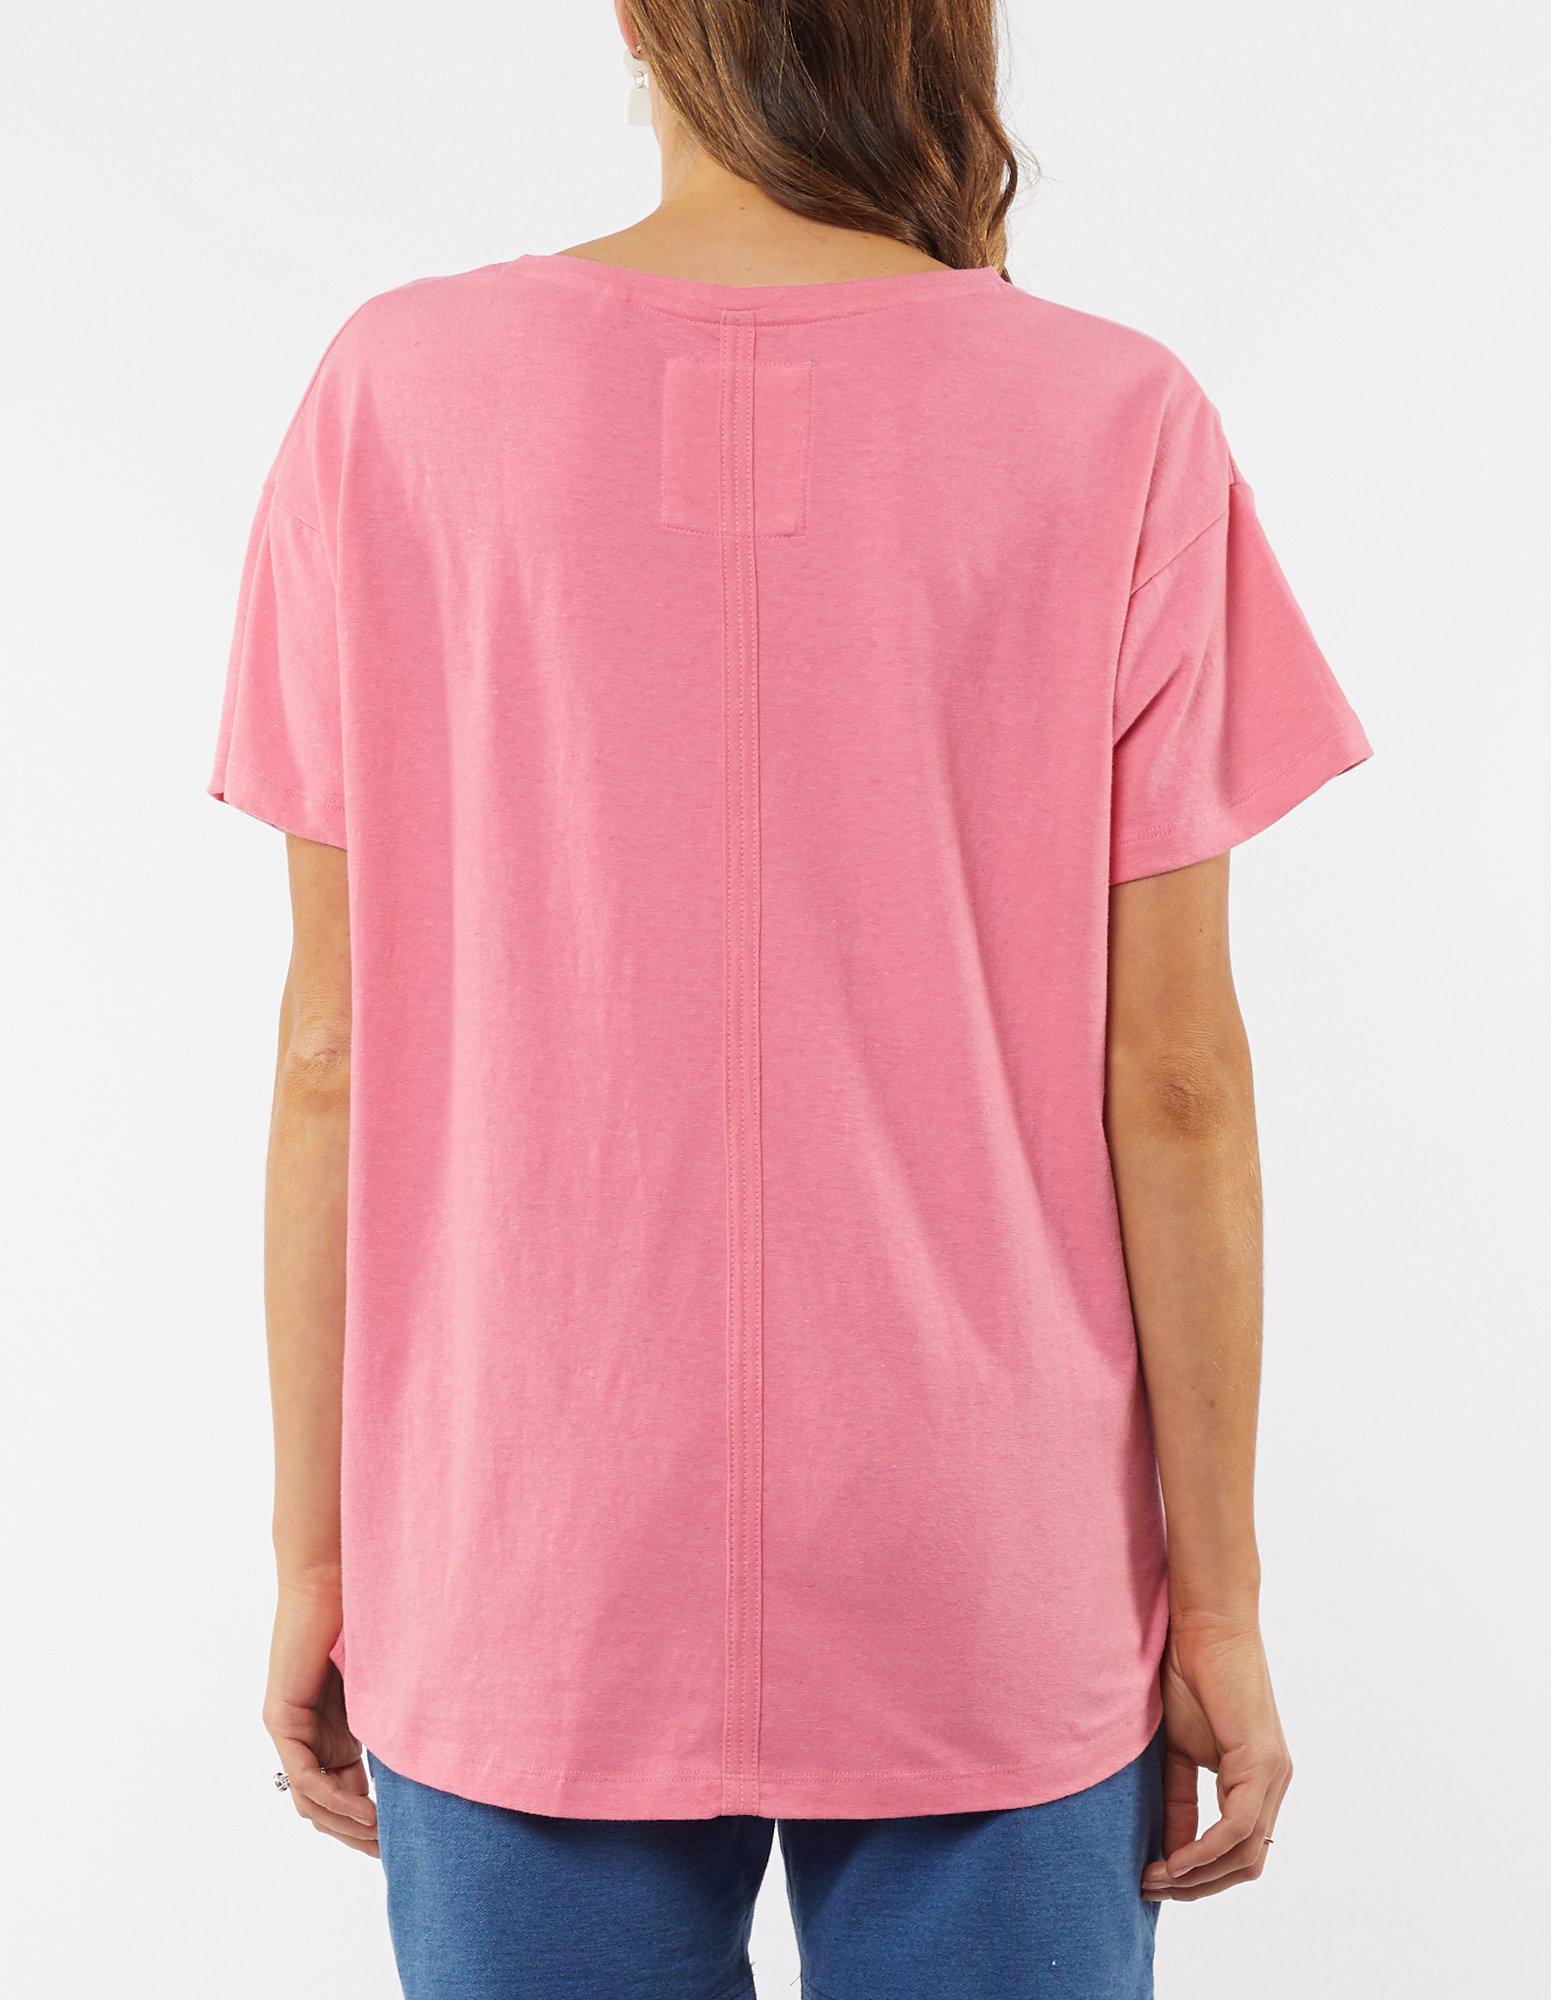 Clover S/S Tee - Chateau Rose - Elm Lifestyle - FUDGE Gifts Home Lifestyle